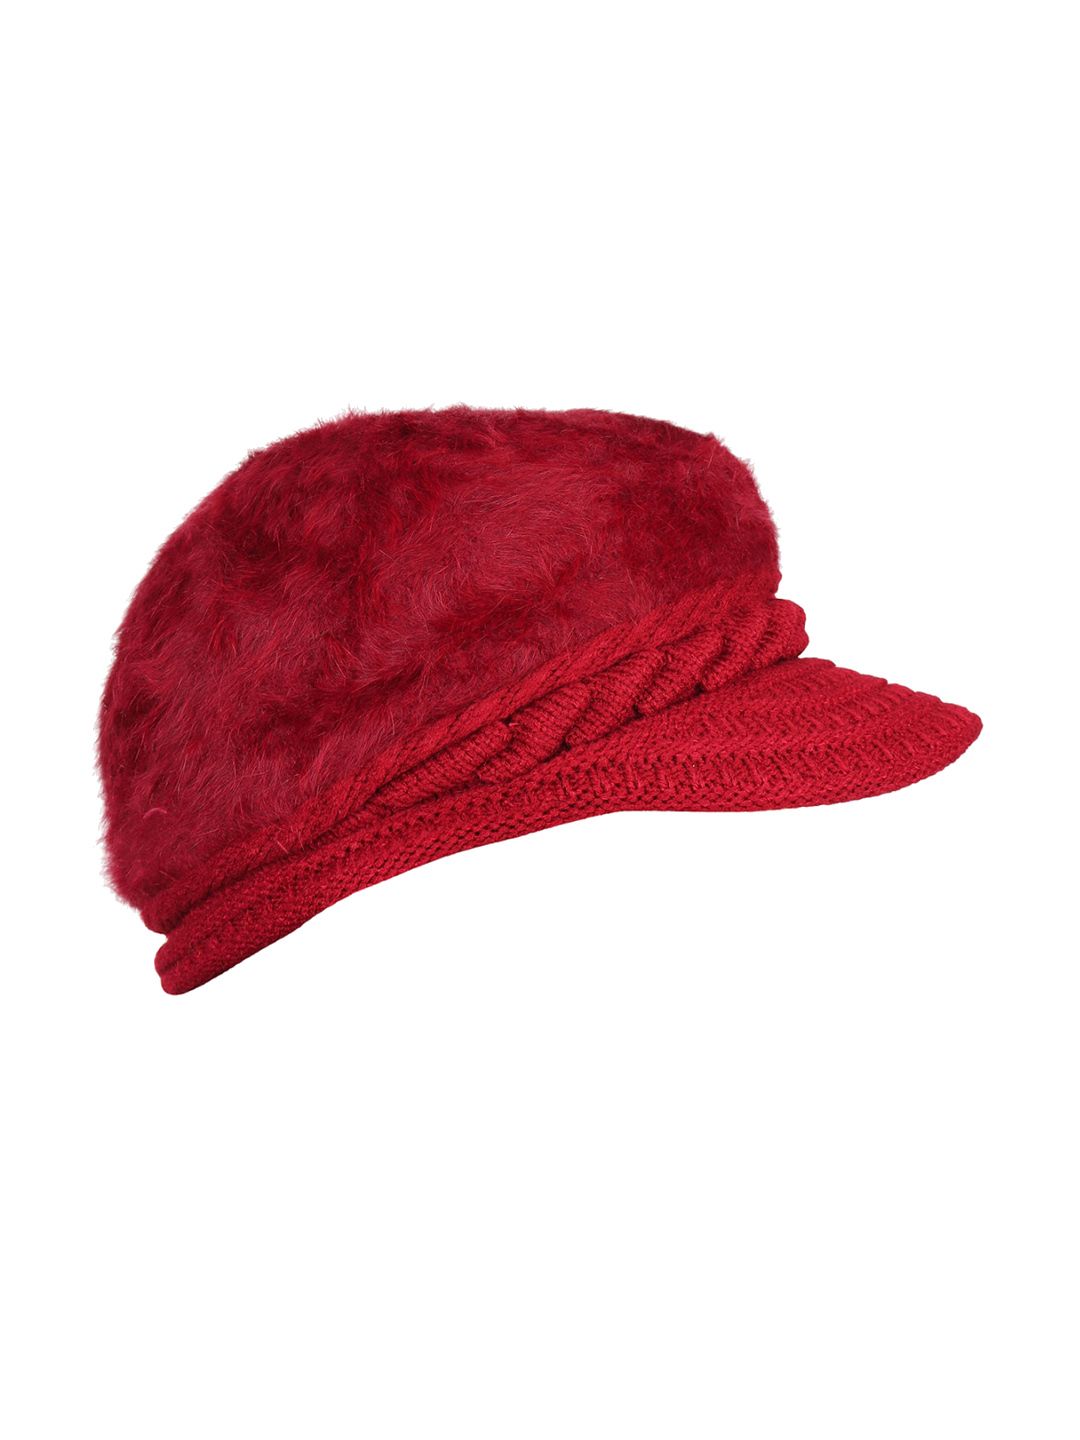 iSWEVEN Unisex Maroon Solid Woven Expandable Visor Cap Price in India